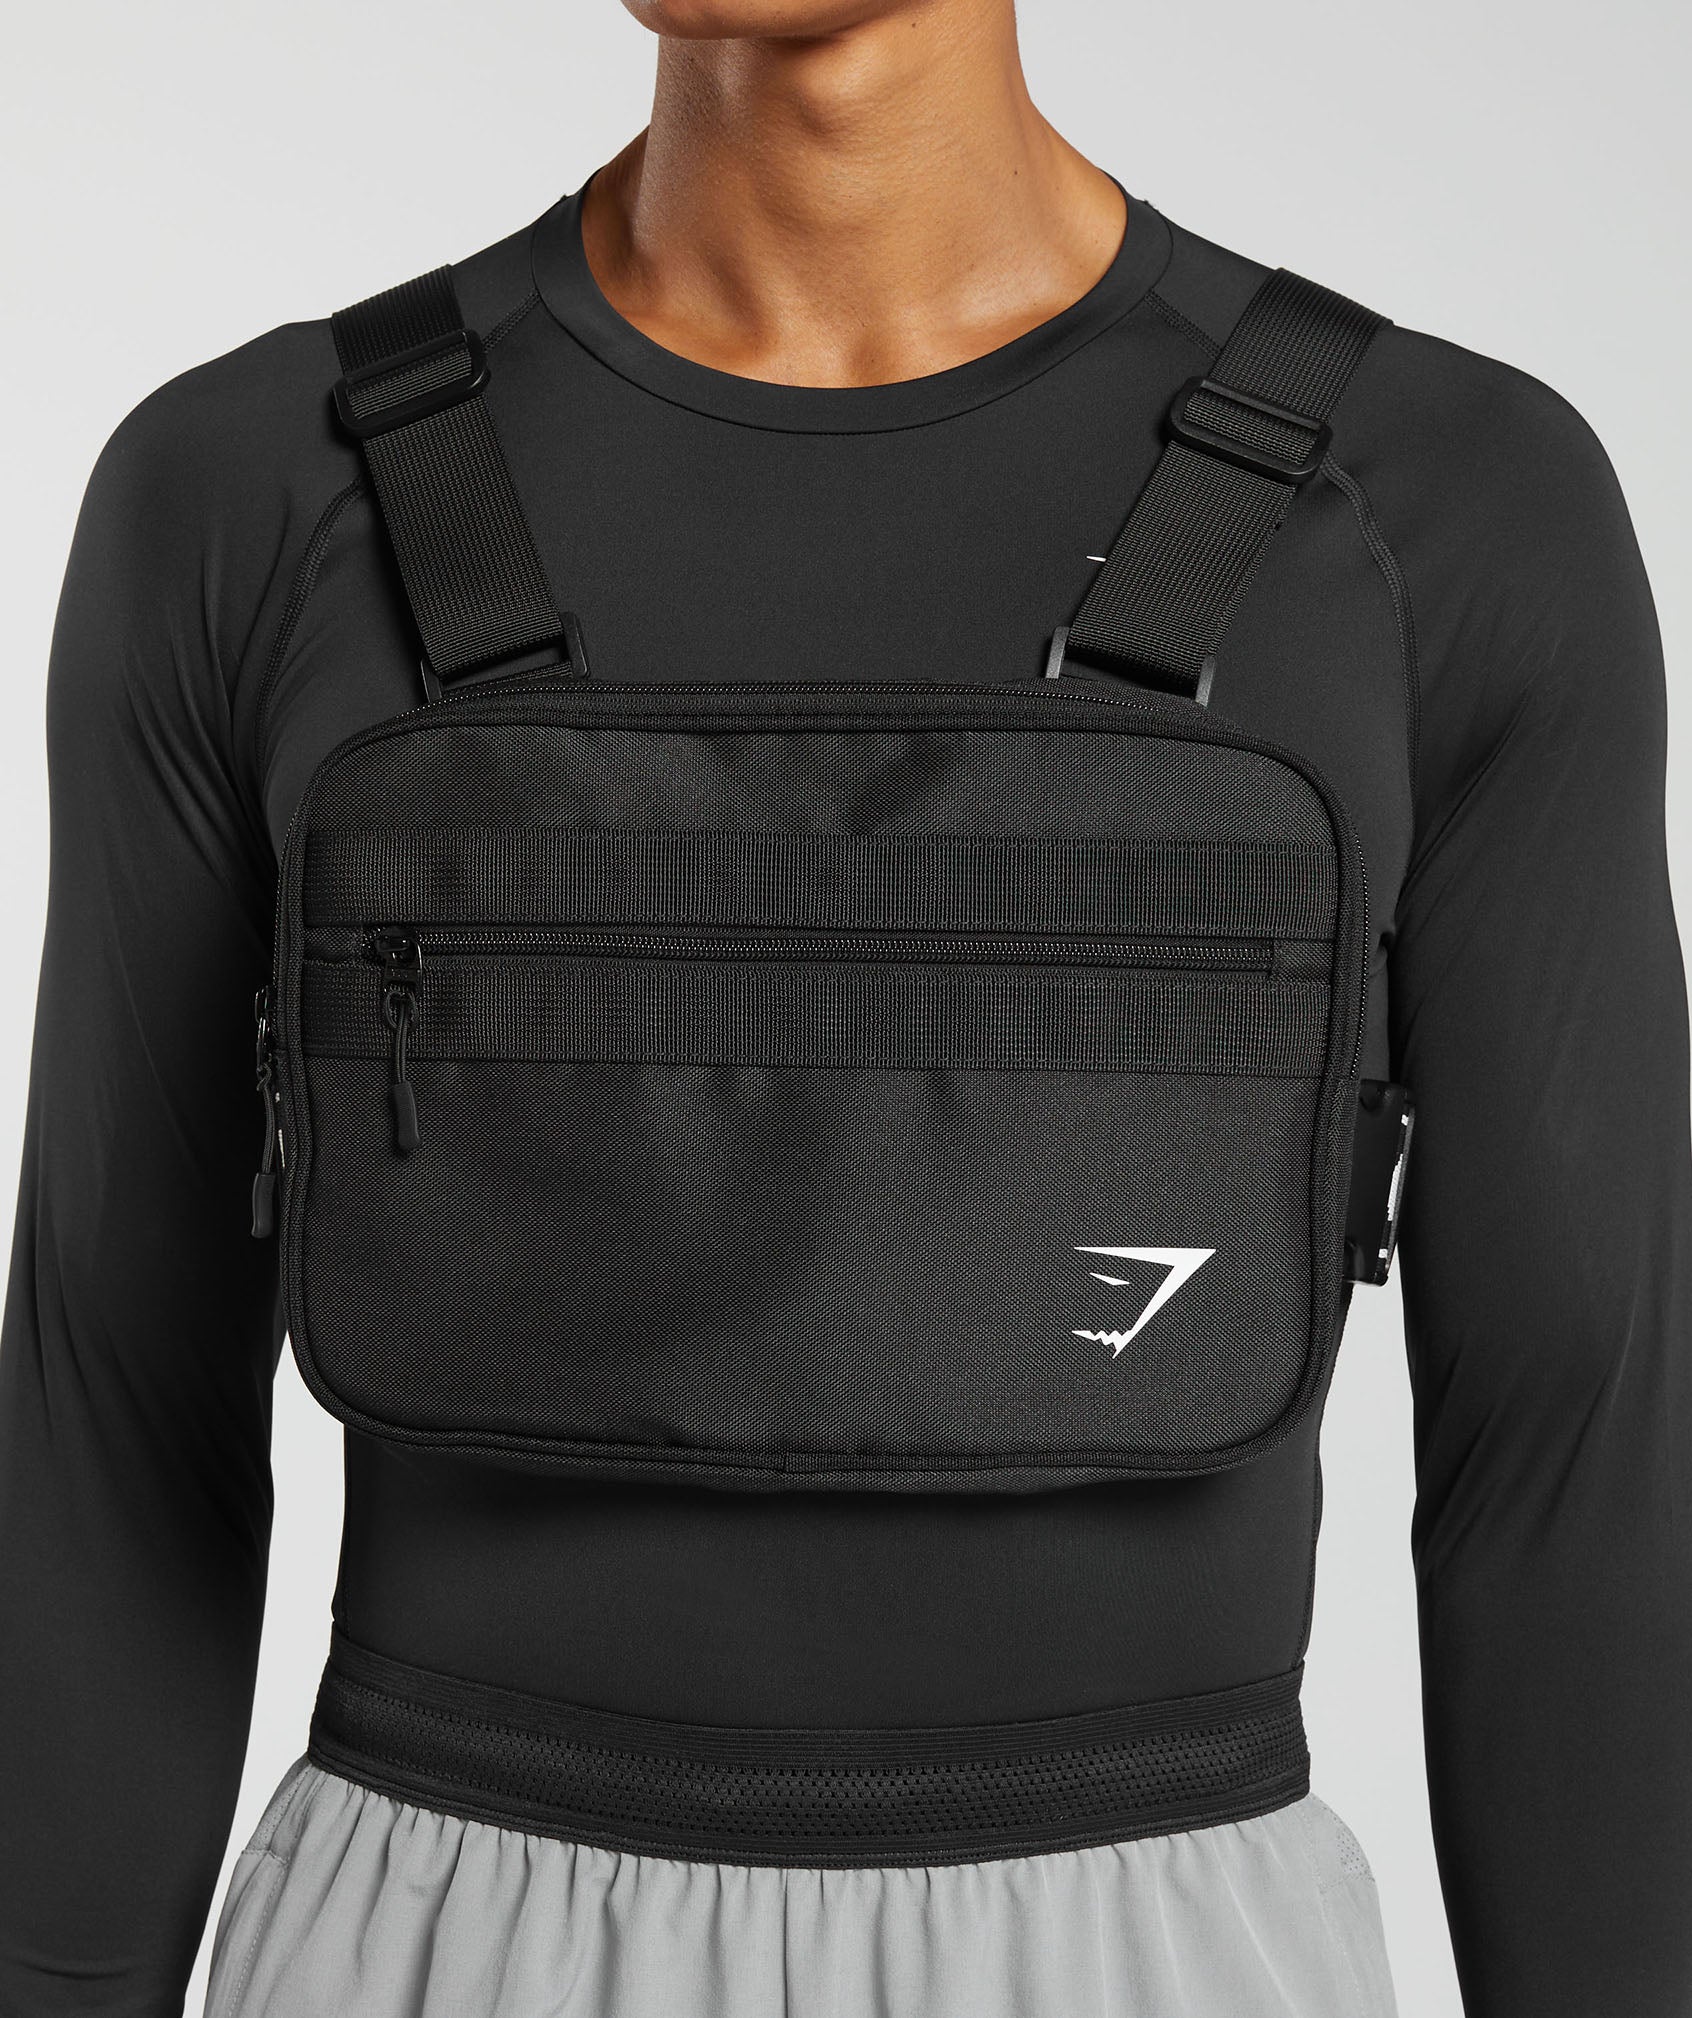 Chest Rig in Black - view 1